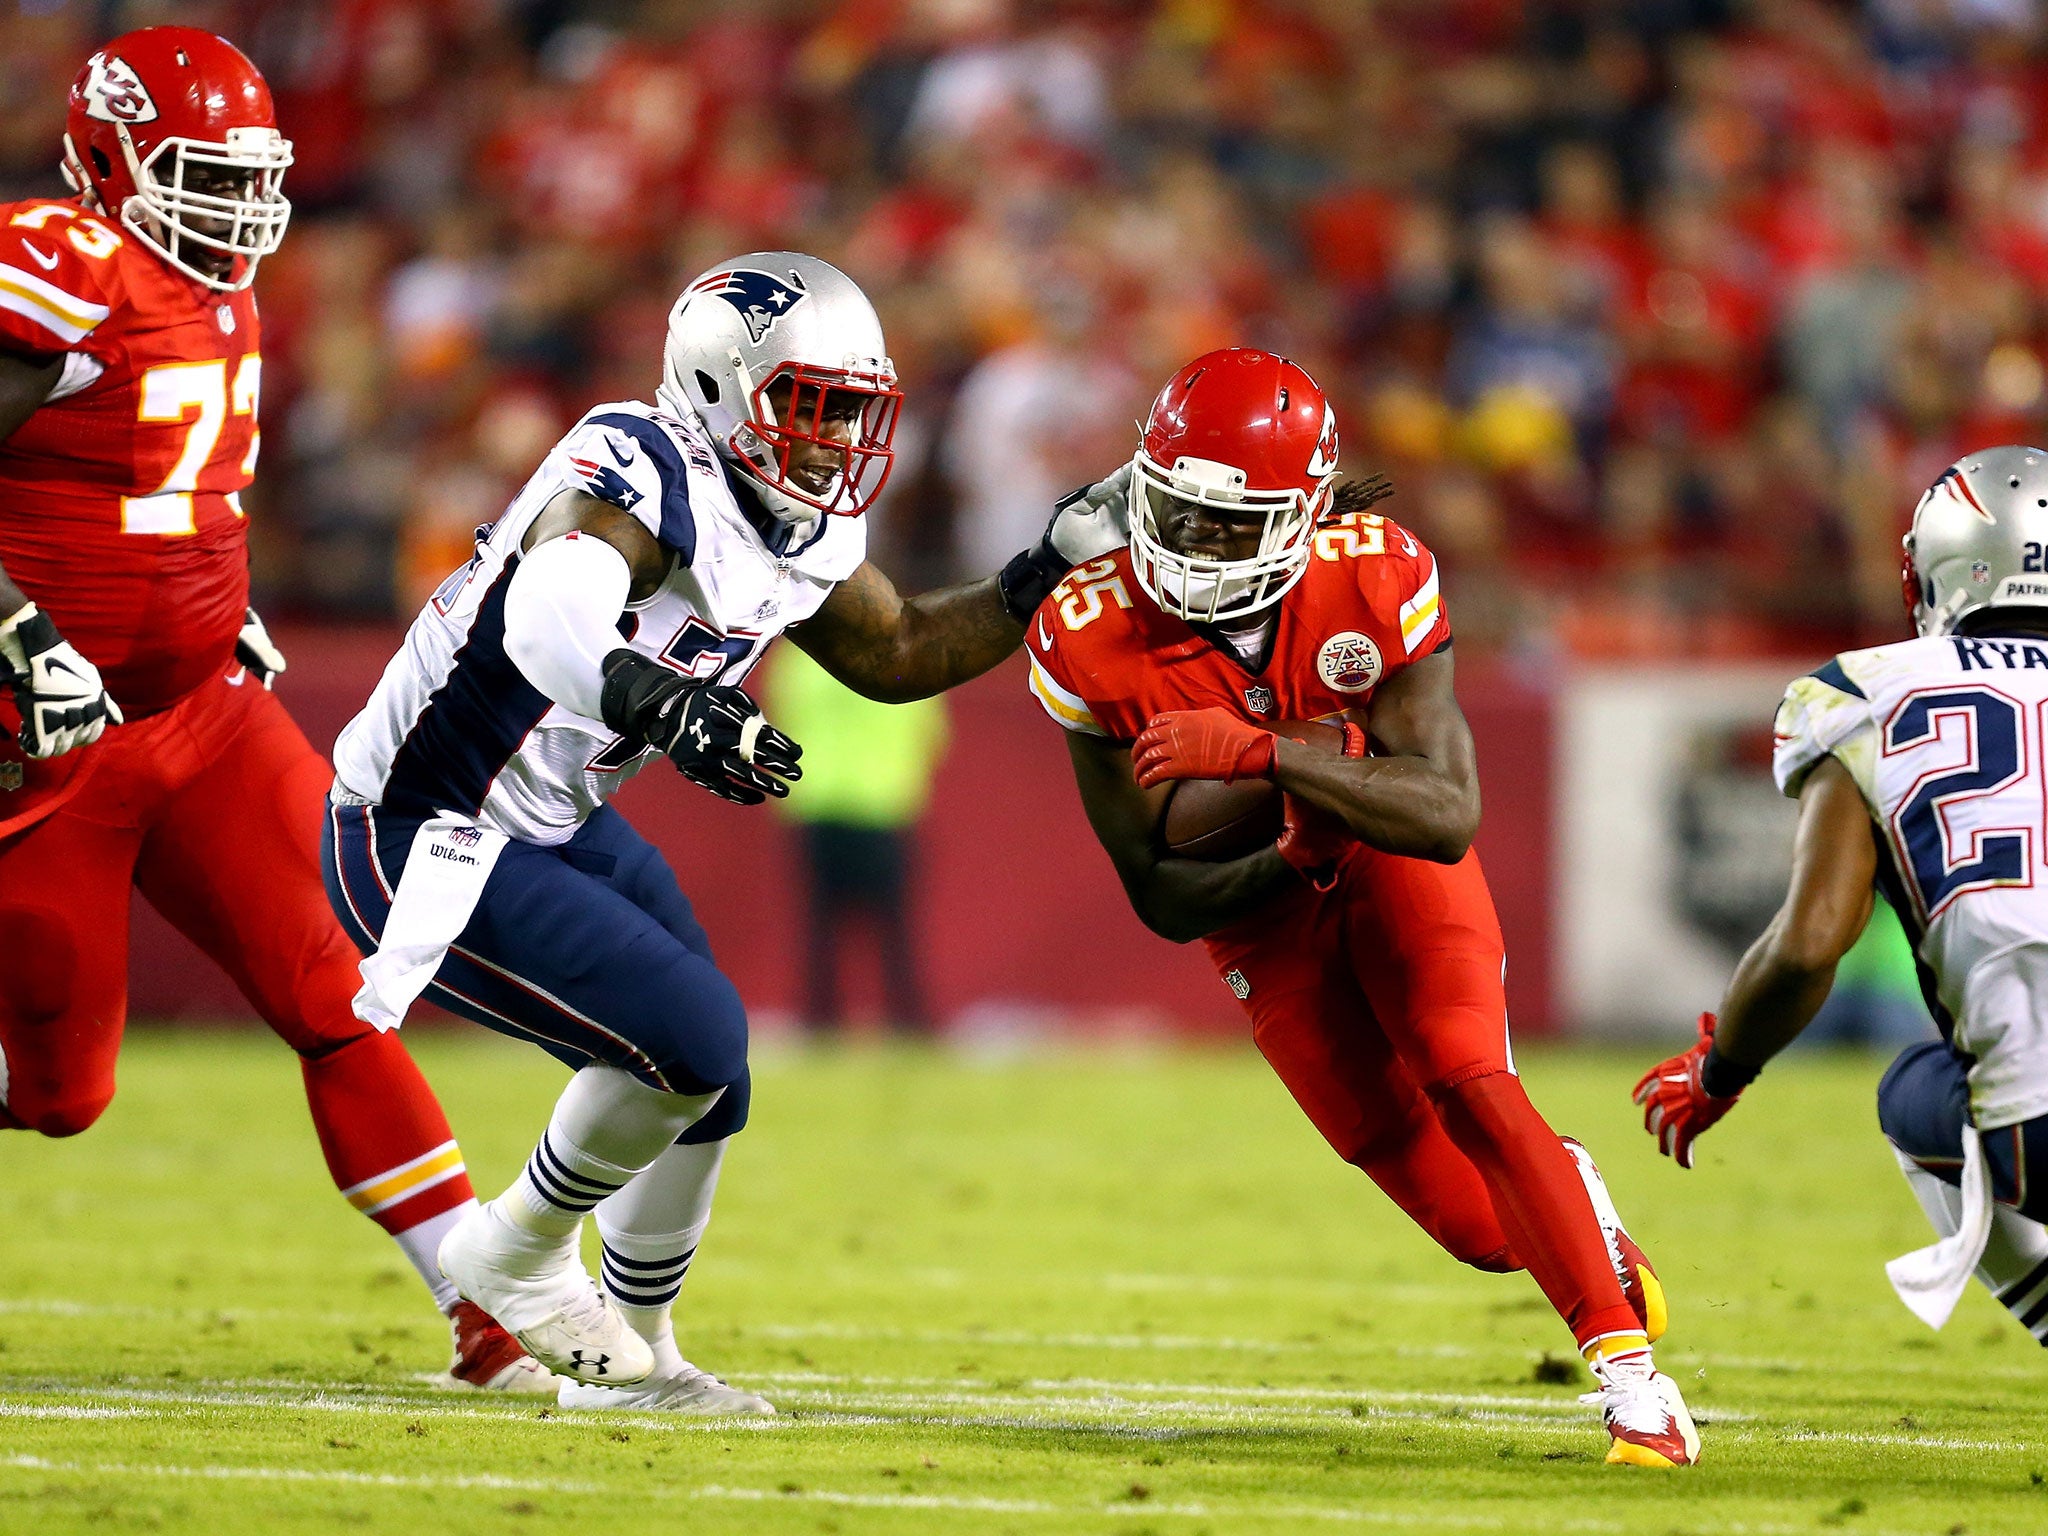 Kansas running-back Jamaal Charles makes a run on his way to a touchdown